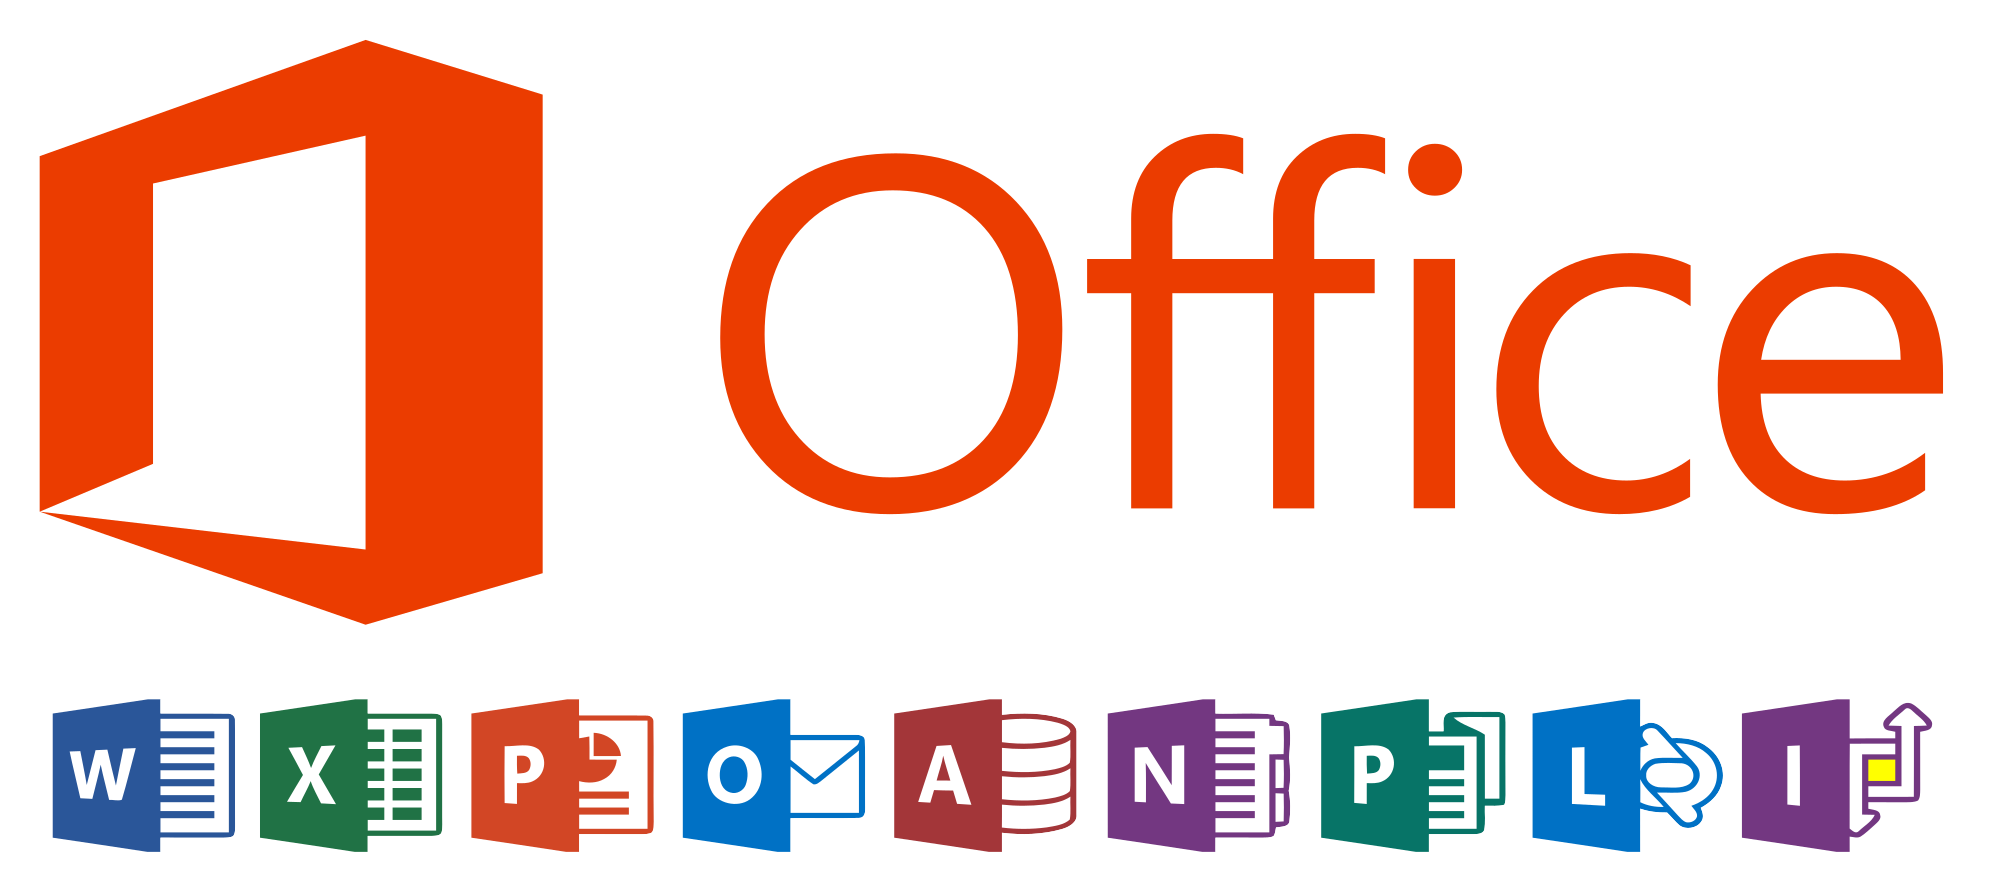 /wp-content/uploads/2019/11/kisspng-office-365-microsoft-office-2-19-microsoft-corpora-previous-logo-microsoft-office-logo-with-app-logo-5bf15a0107b4e8.3379185115425438730316.png